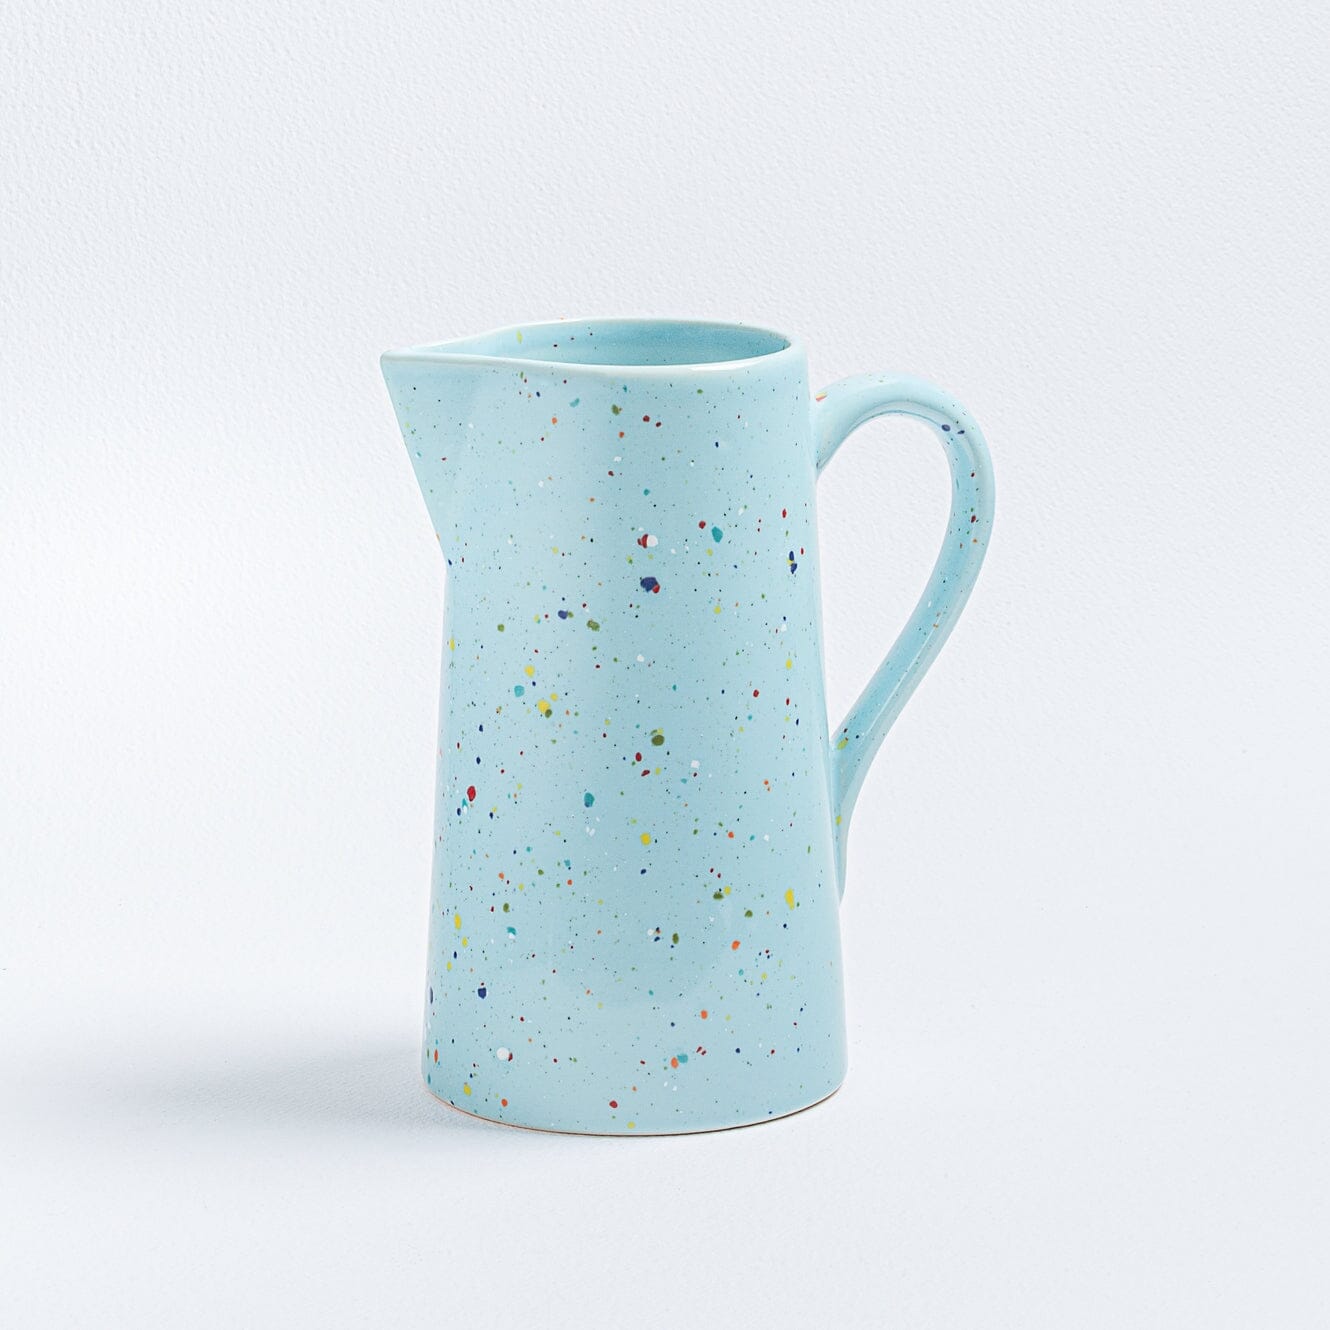 Pitcher "Party" (New Edition) Pitcher Egg Back Home Blau 